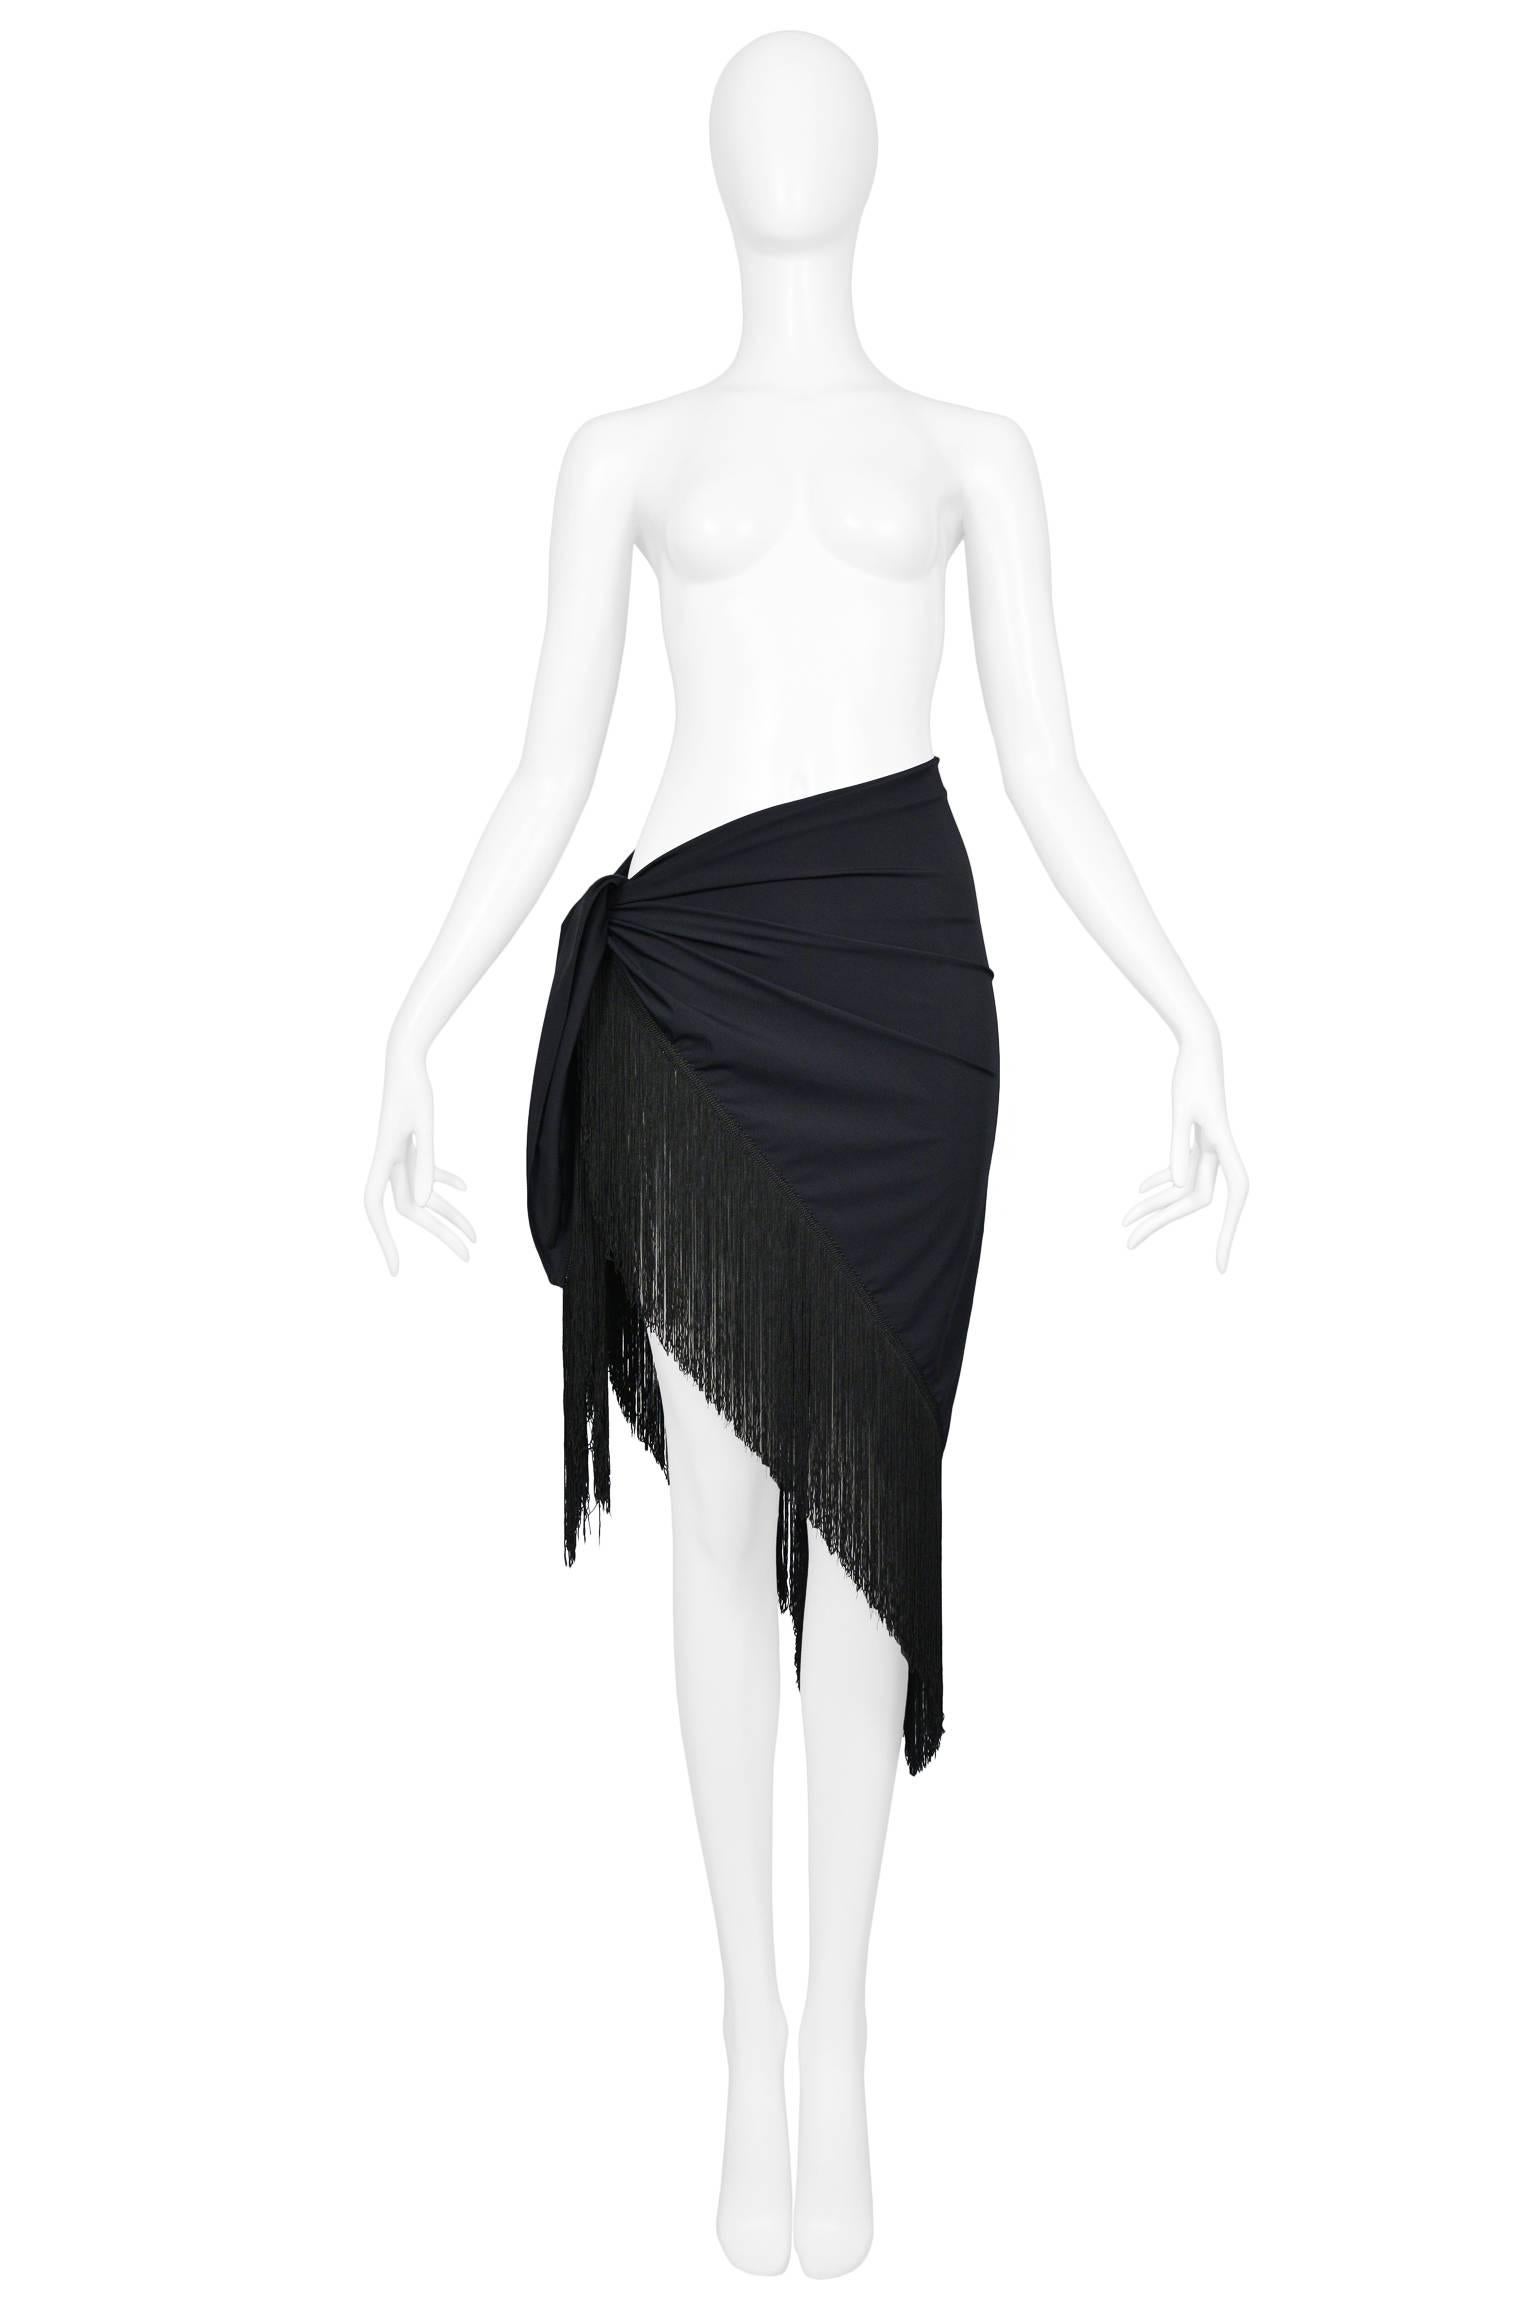 Chic Christian Dior by John Galliano large black beach sarong wrap with heavy fringe. Fabric has some stretch and feels like it would dry quickly. Fabulous over a bikini or one piece. Perfect for the beach or the pool. Never worn. 